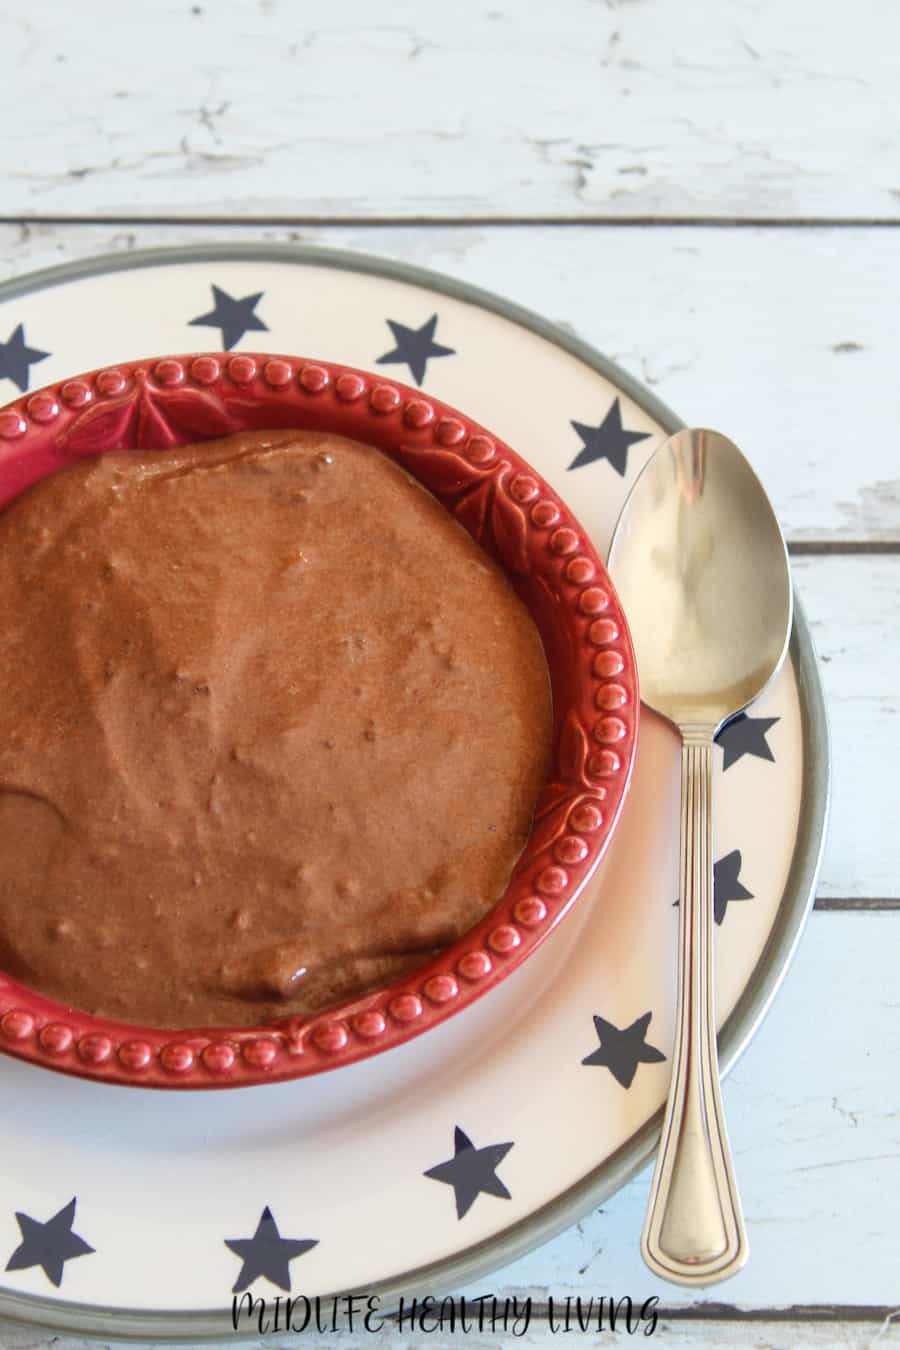 A look at the finished chocolate pudding in a dish ready to serve.